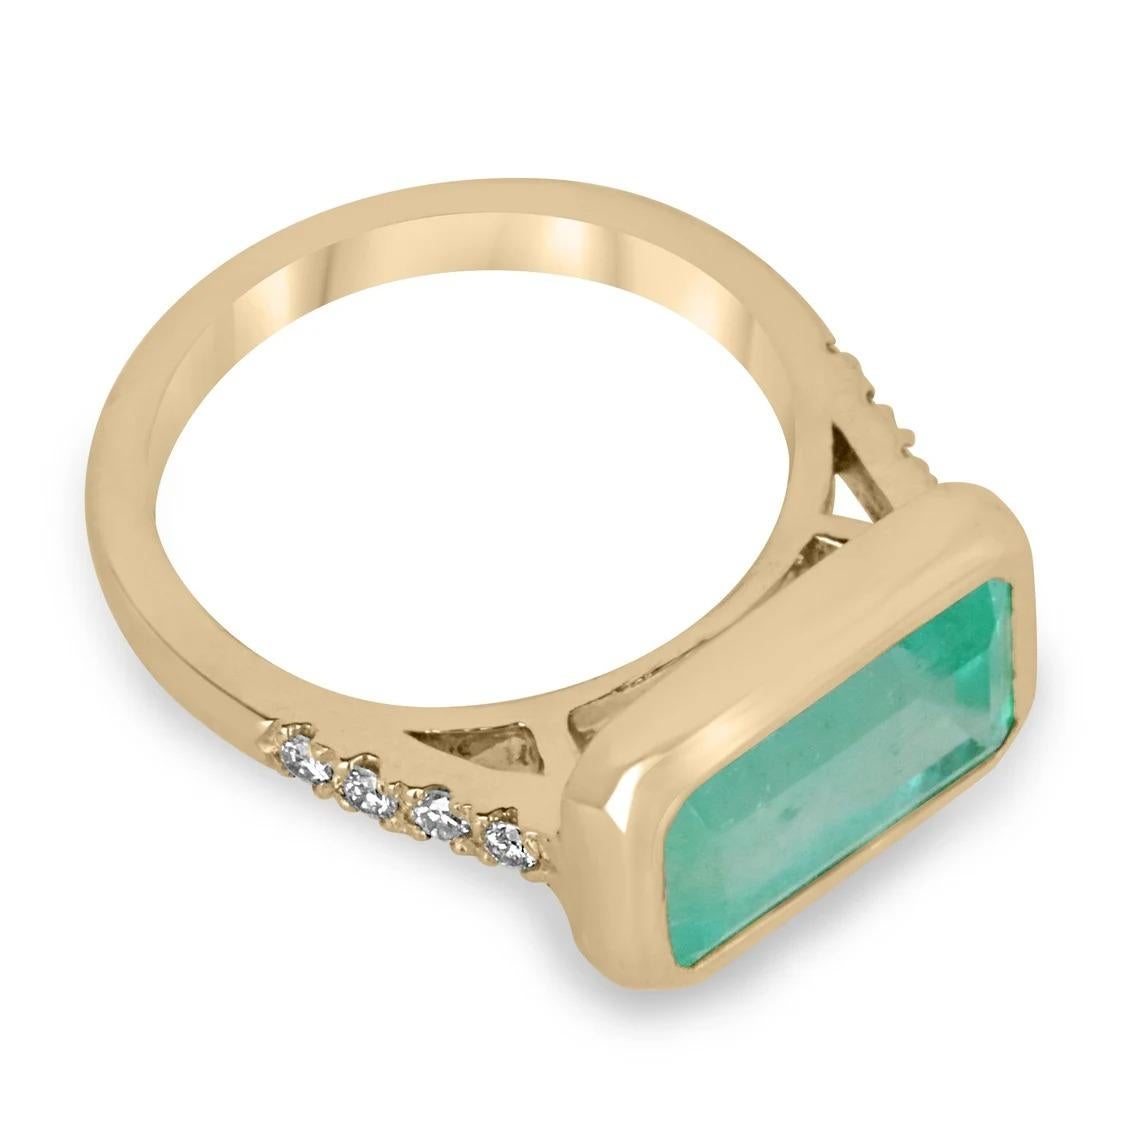 Featuring a one of a kind emerald and diamond ring. This remarkable piece features a large emerald cut emerald from the best mines in the world, Colombia. The gemstone showcases an enthralling spring green color that is vivacious and lustrous all in